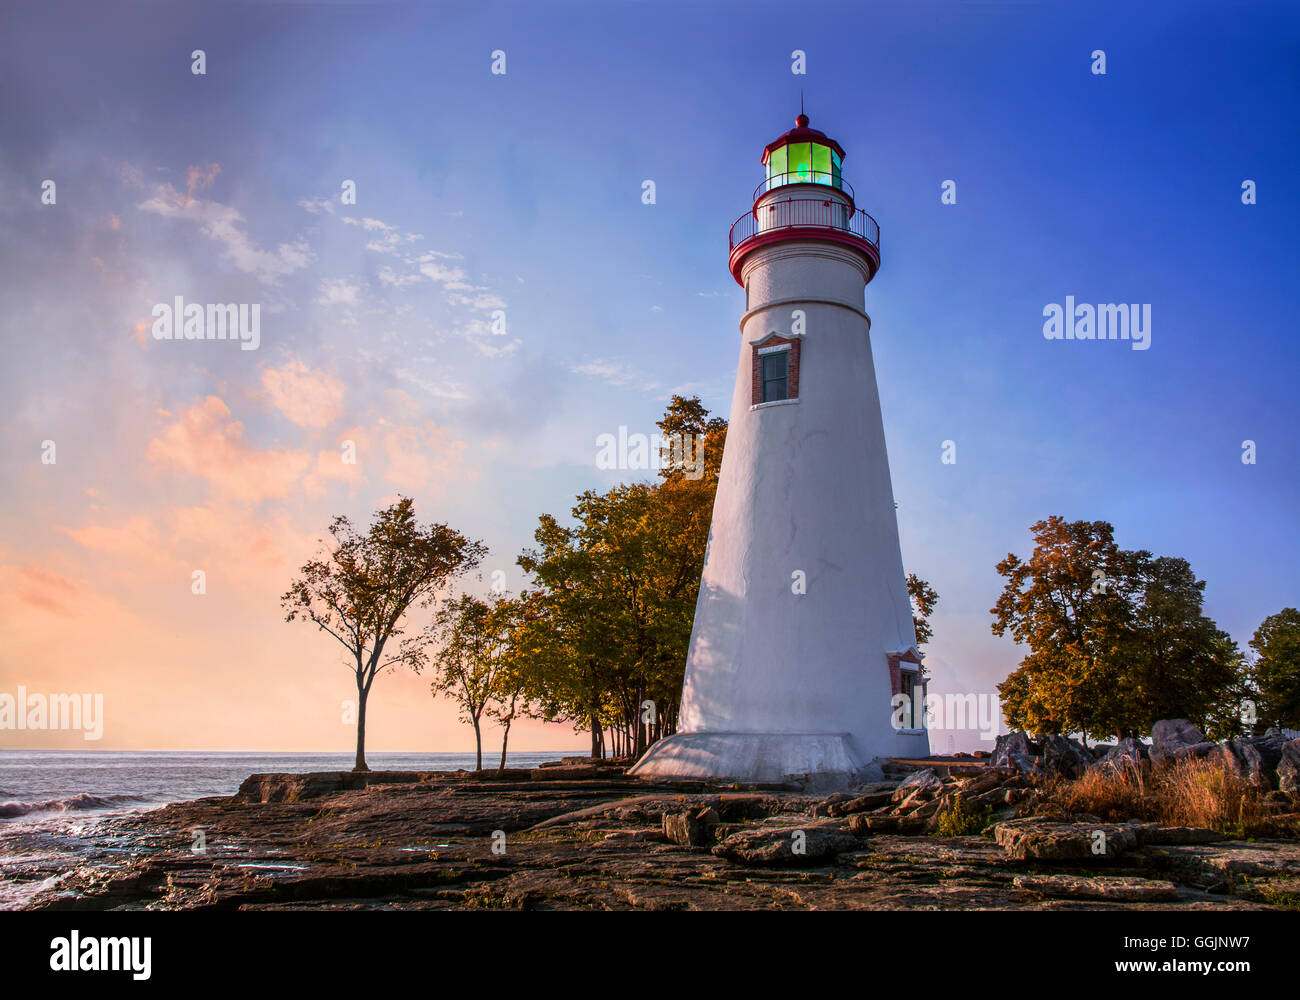 The Marblehead Lighthouse In The First Light Of Dawn On A Foggy Morning Over Lake Erie At Marblehead Ohio, USA Stock Photo